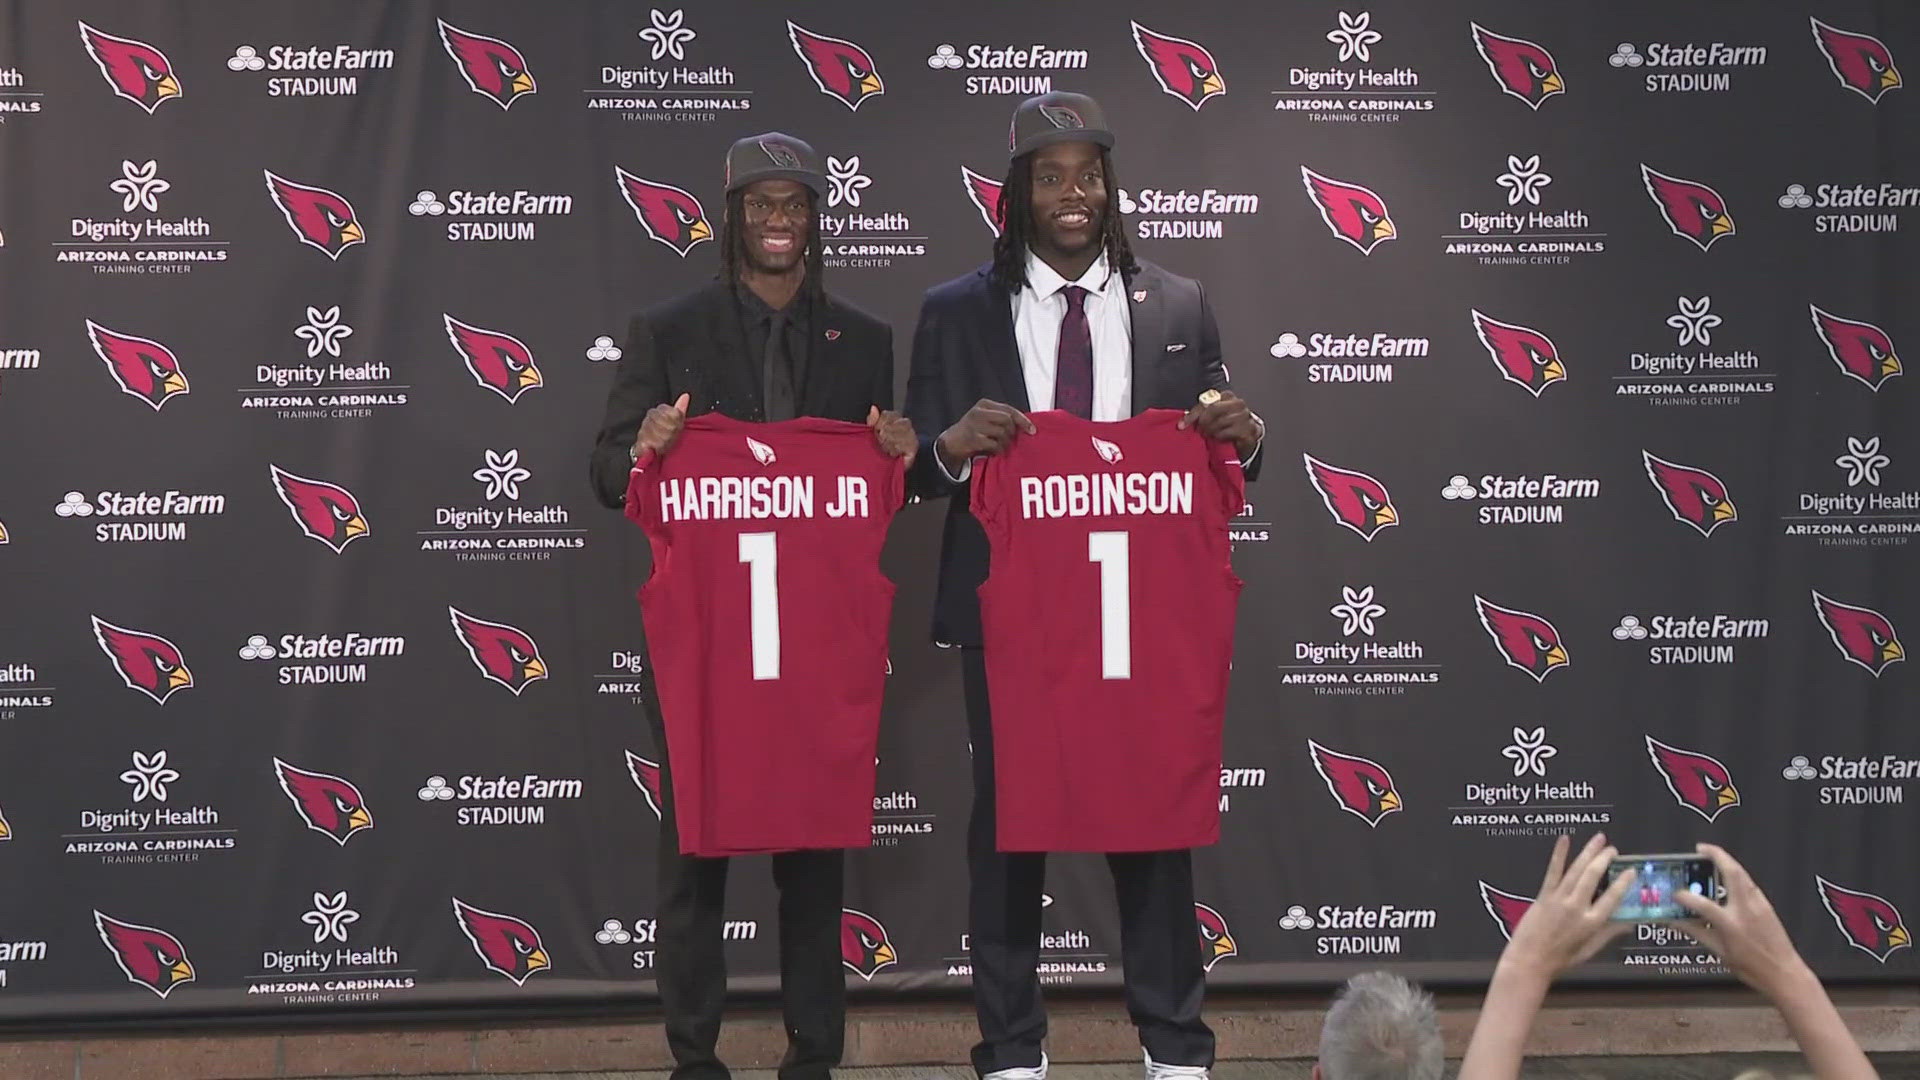 It's an exciting day for the franchise as they introduce their first two picks from the draft.